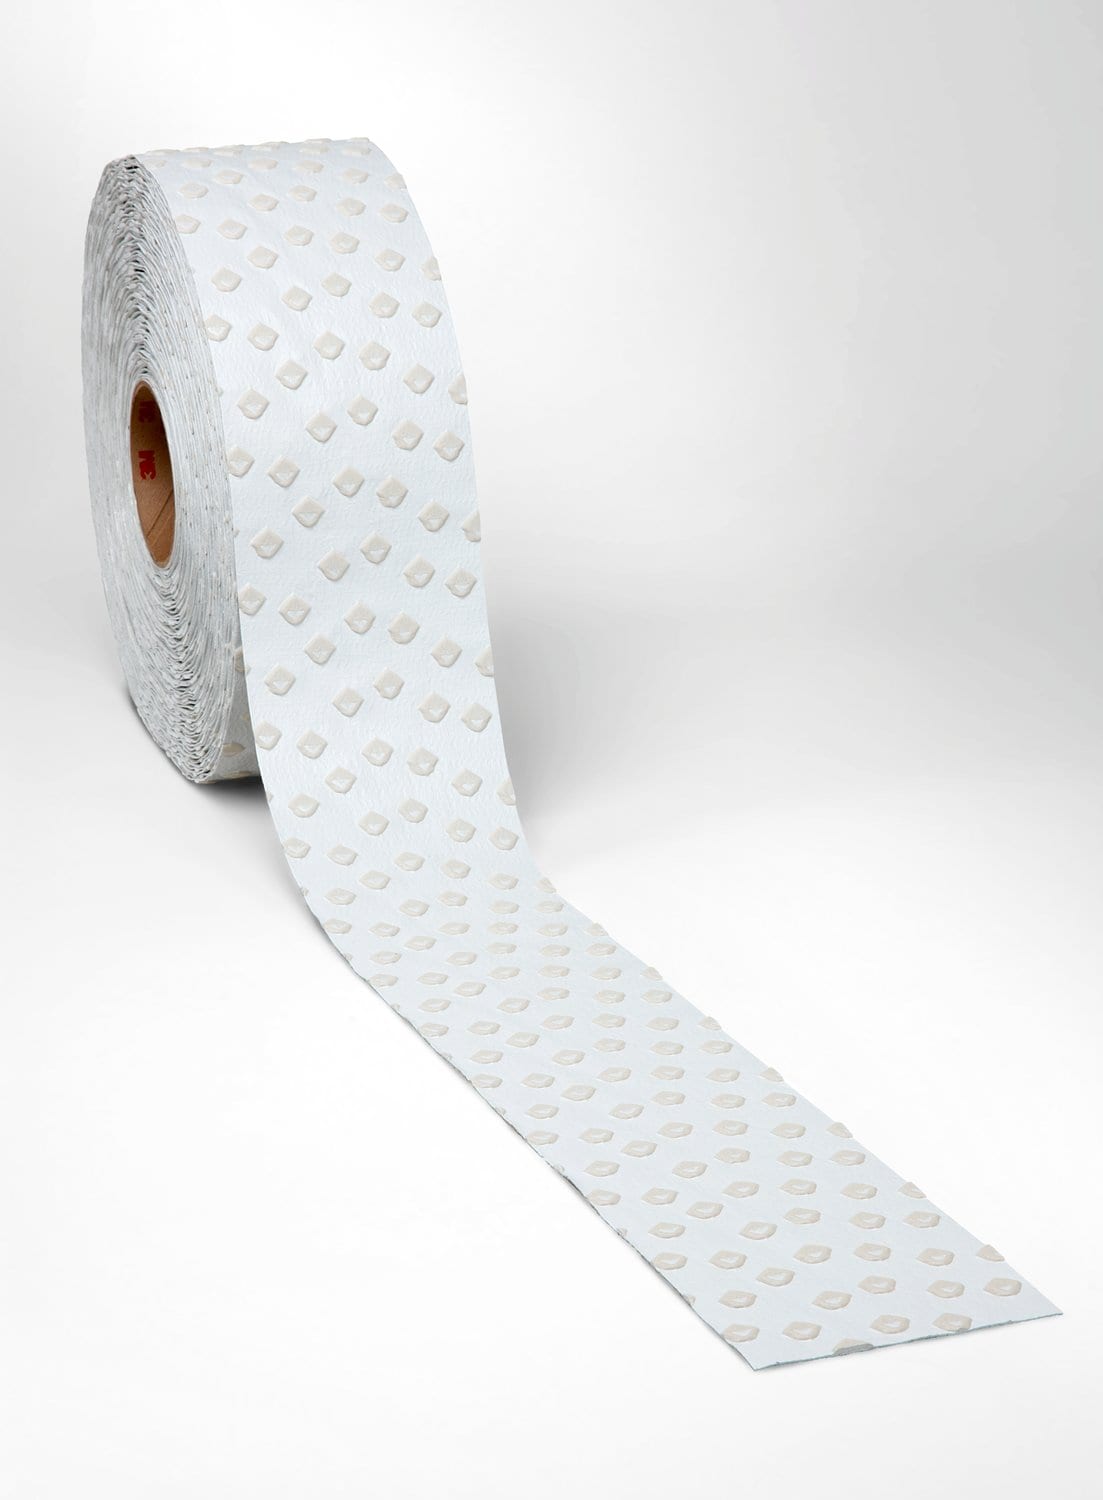 7100315010 - 3M Stamark Removable Pavement Marking Tape A710IR, White, 12 in x 30 yd 1 Rol/CV